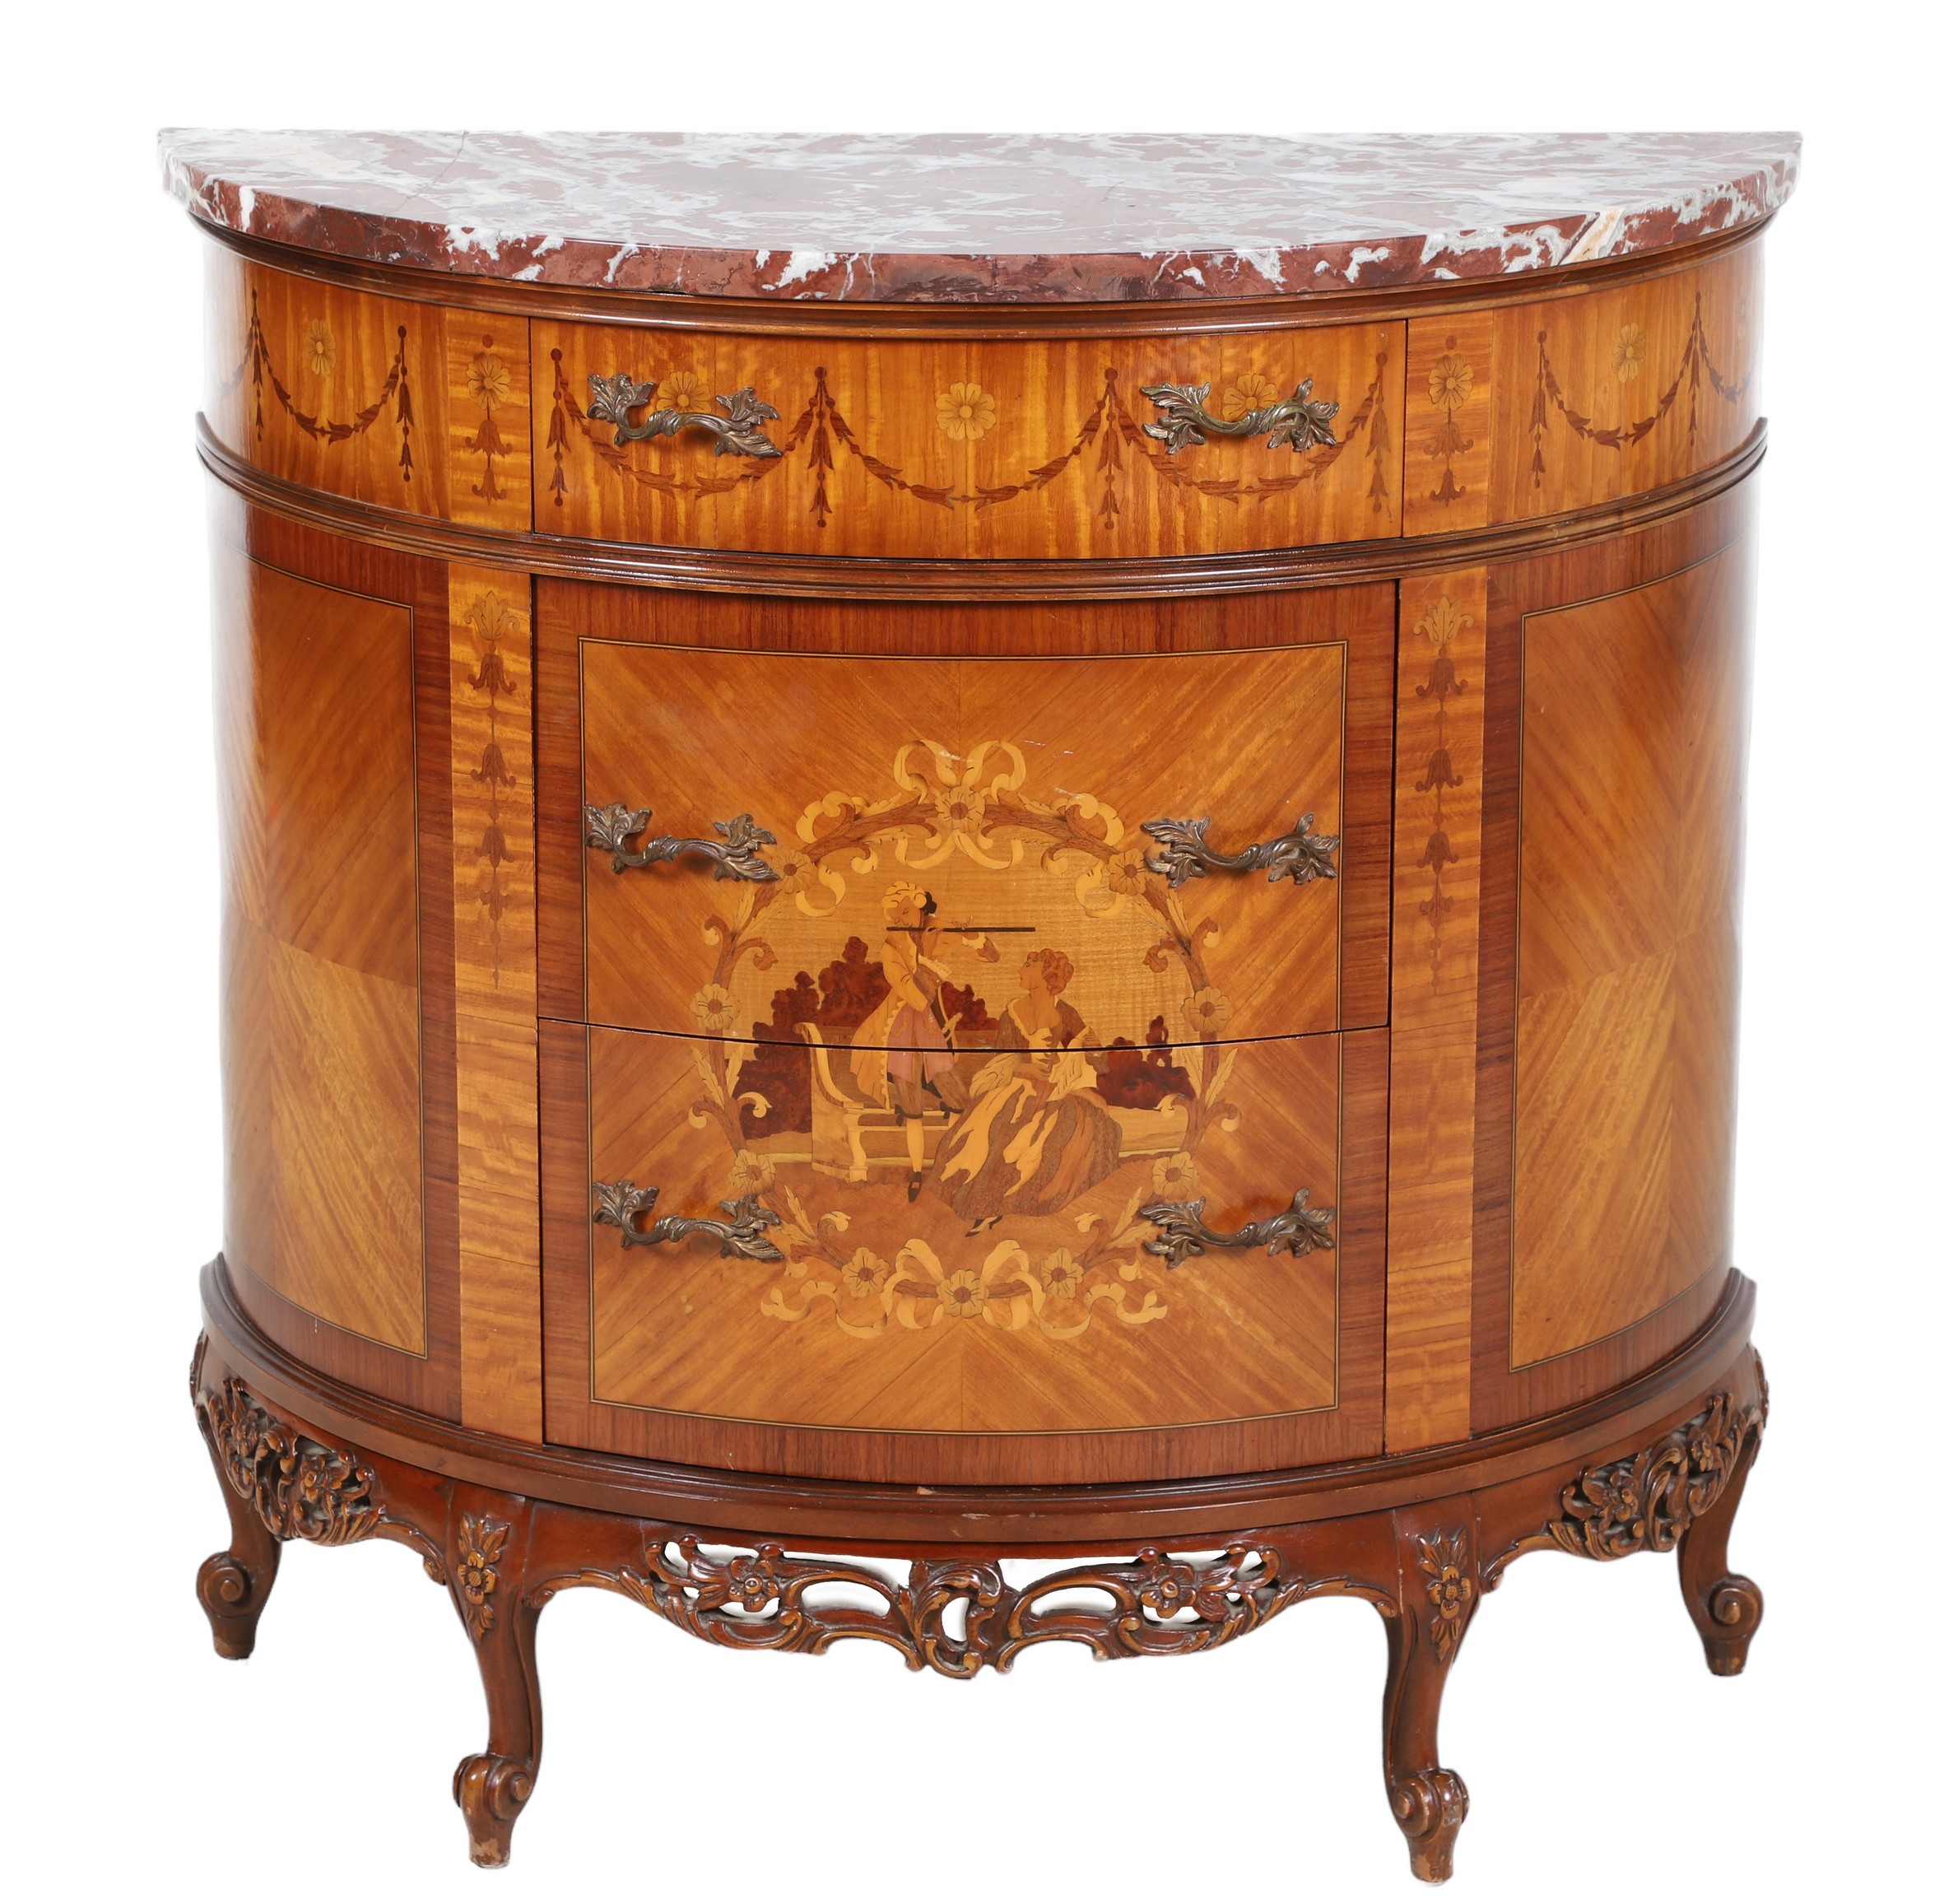 Louis XV style marbletop inlaid 2e0b27